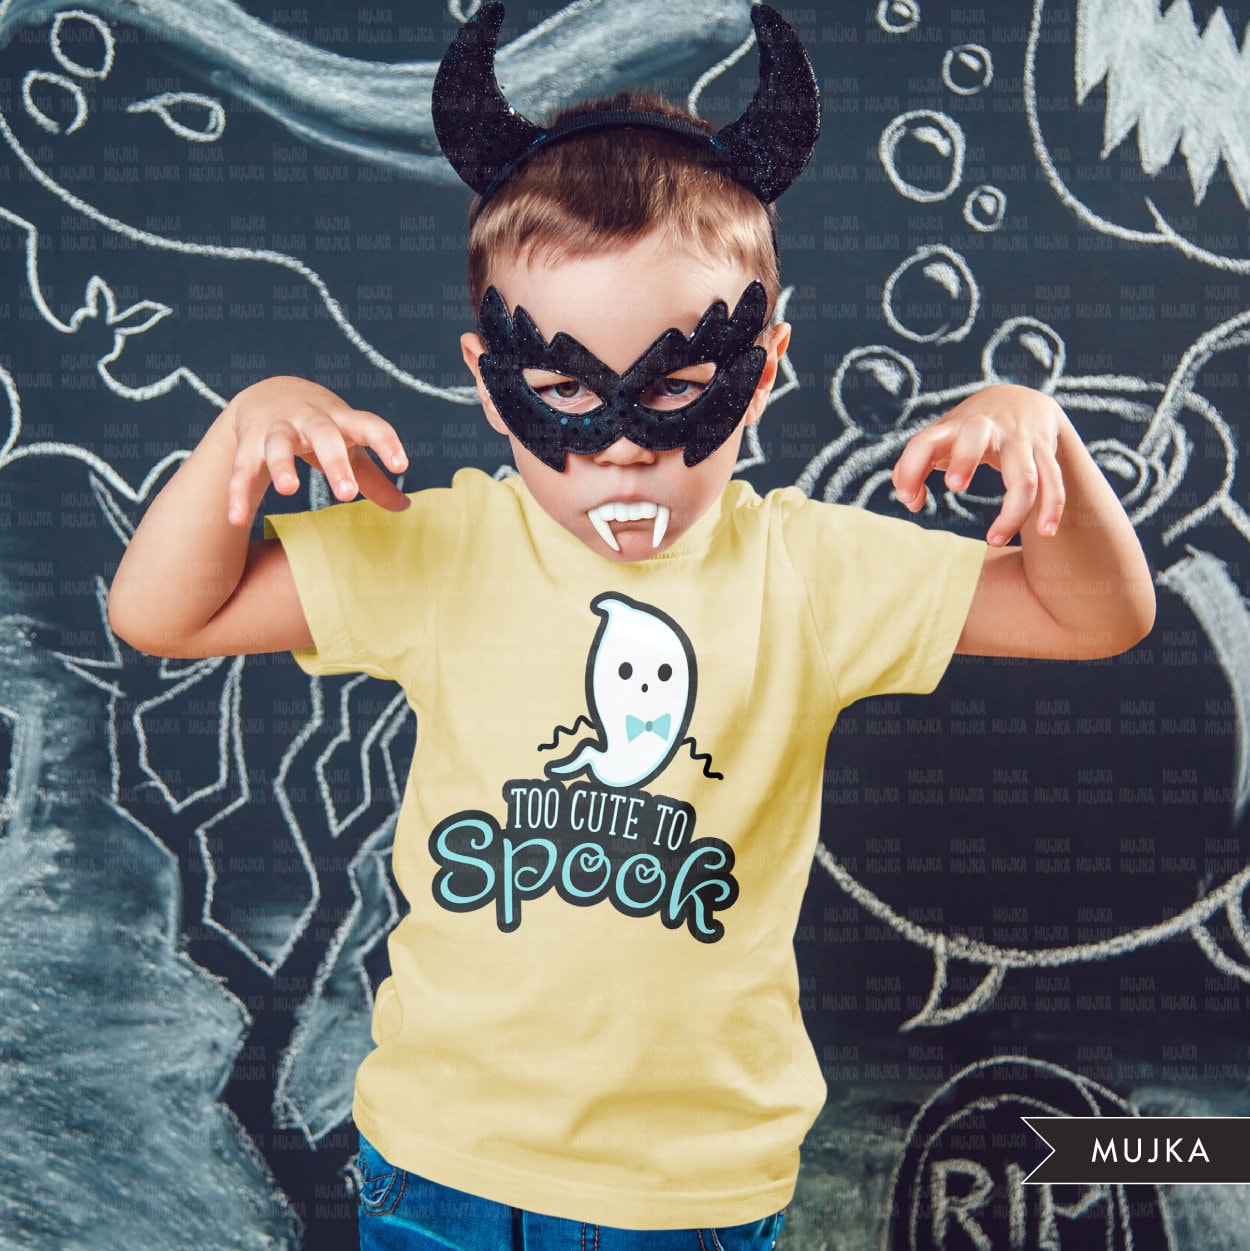 Too cute to spook png, Halloween clipart, ghost clipart, Halloween sublimation designs digital download, cute ghost png, cute baby boy shirt